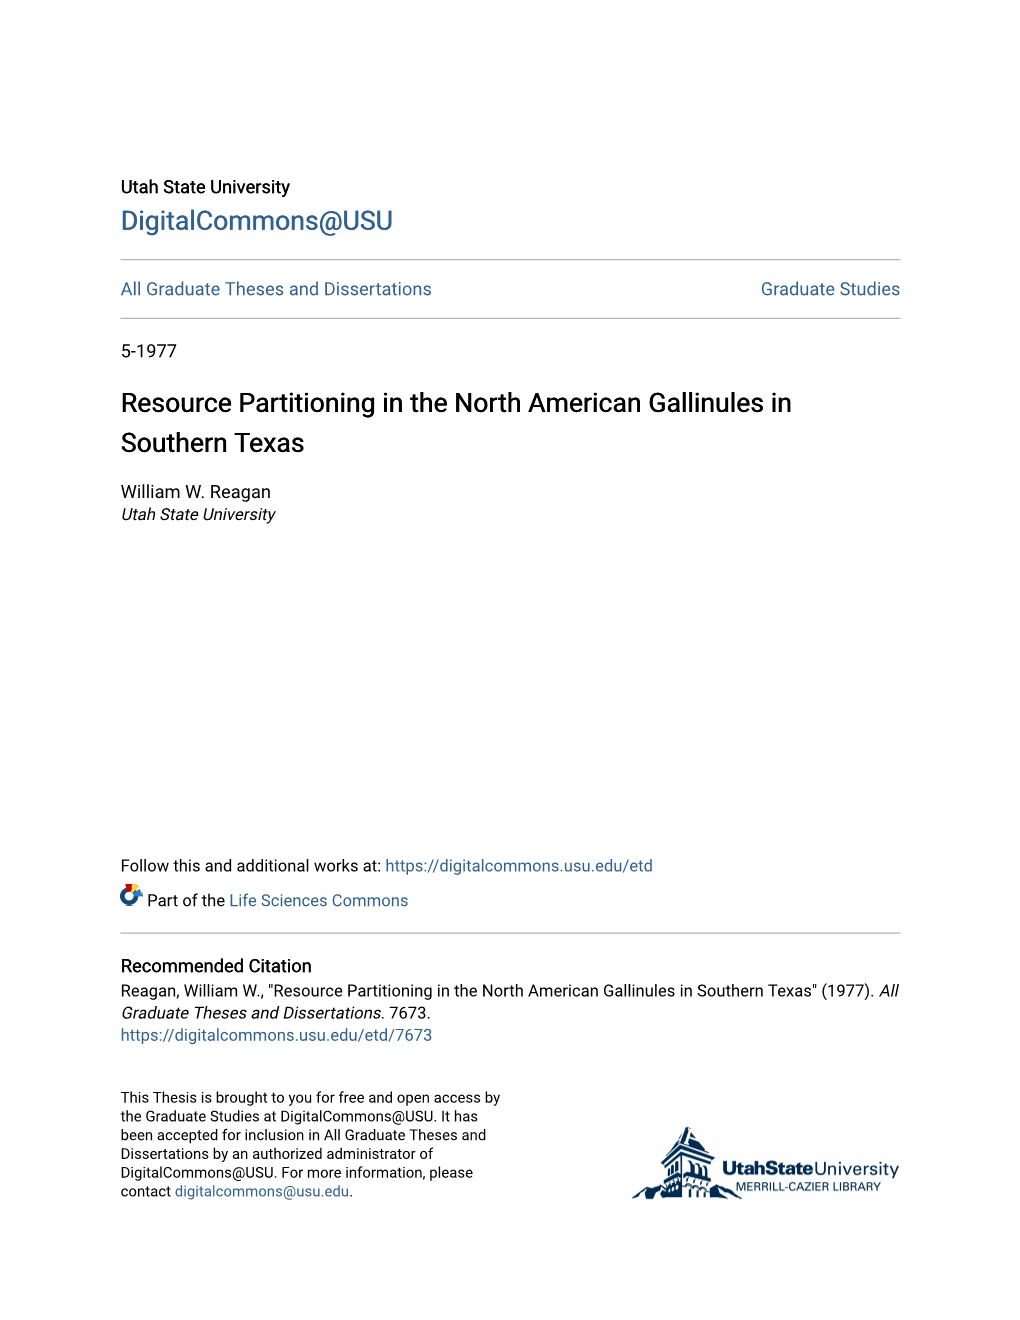 Resource Partitioning in the North American Gallinules in Southern Texas